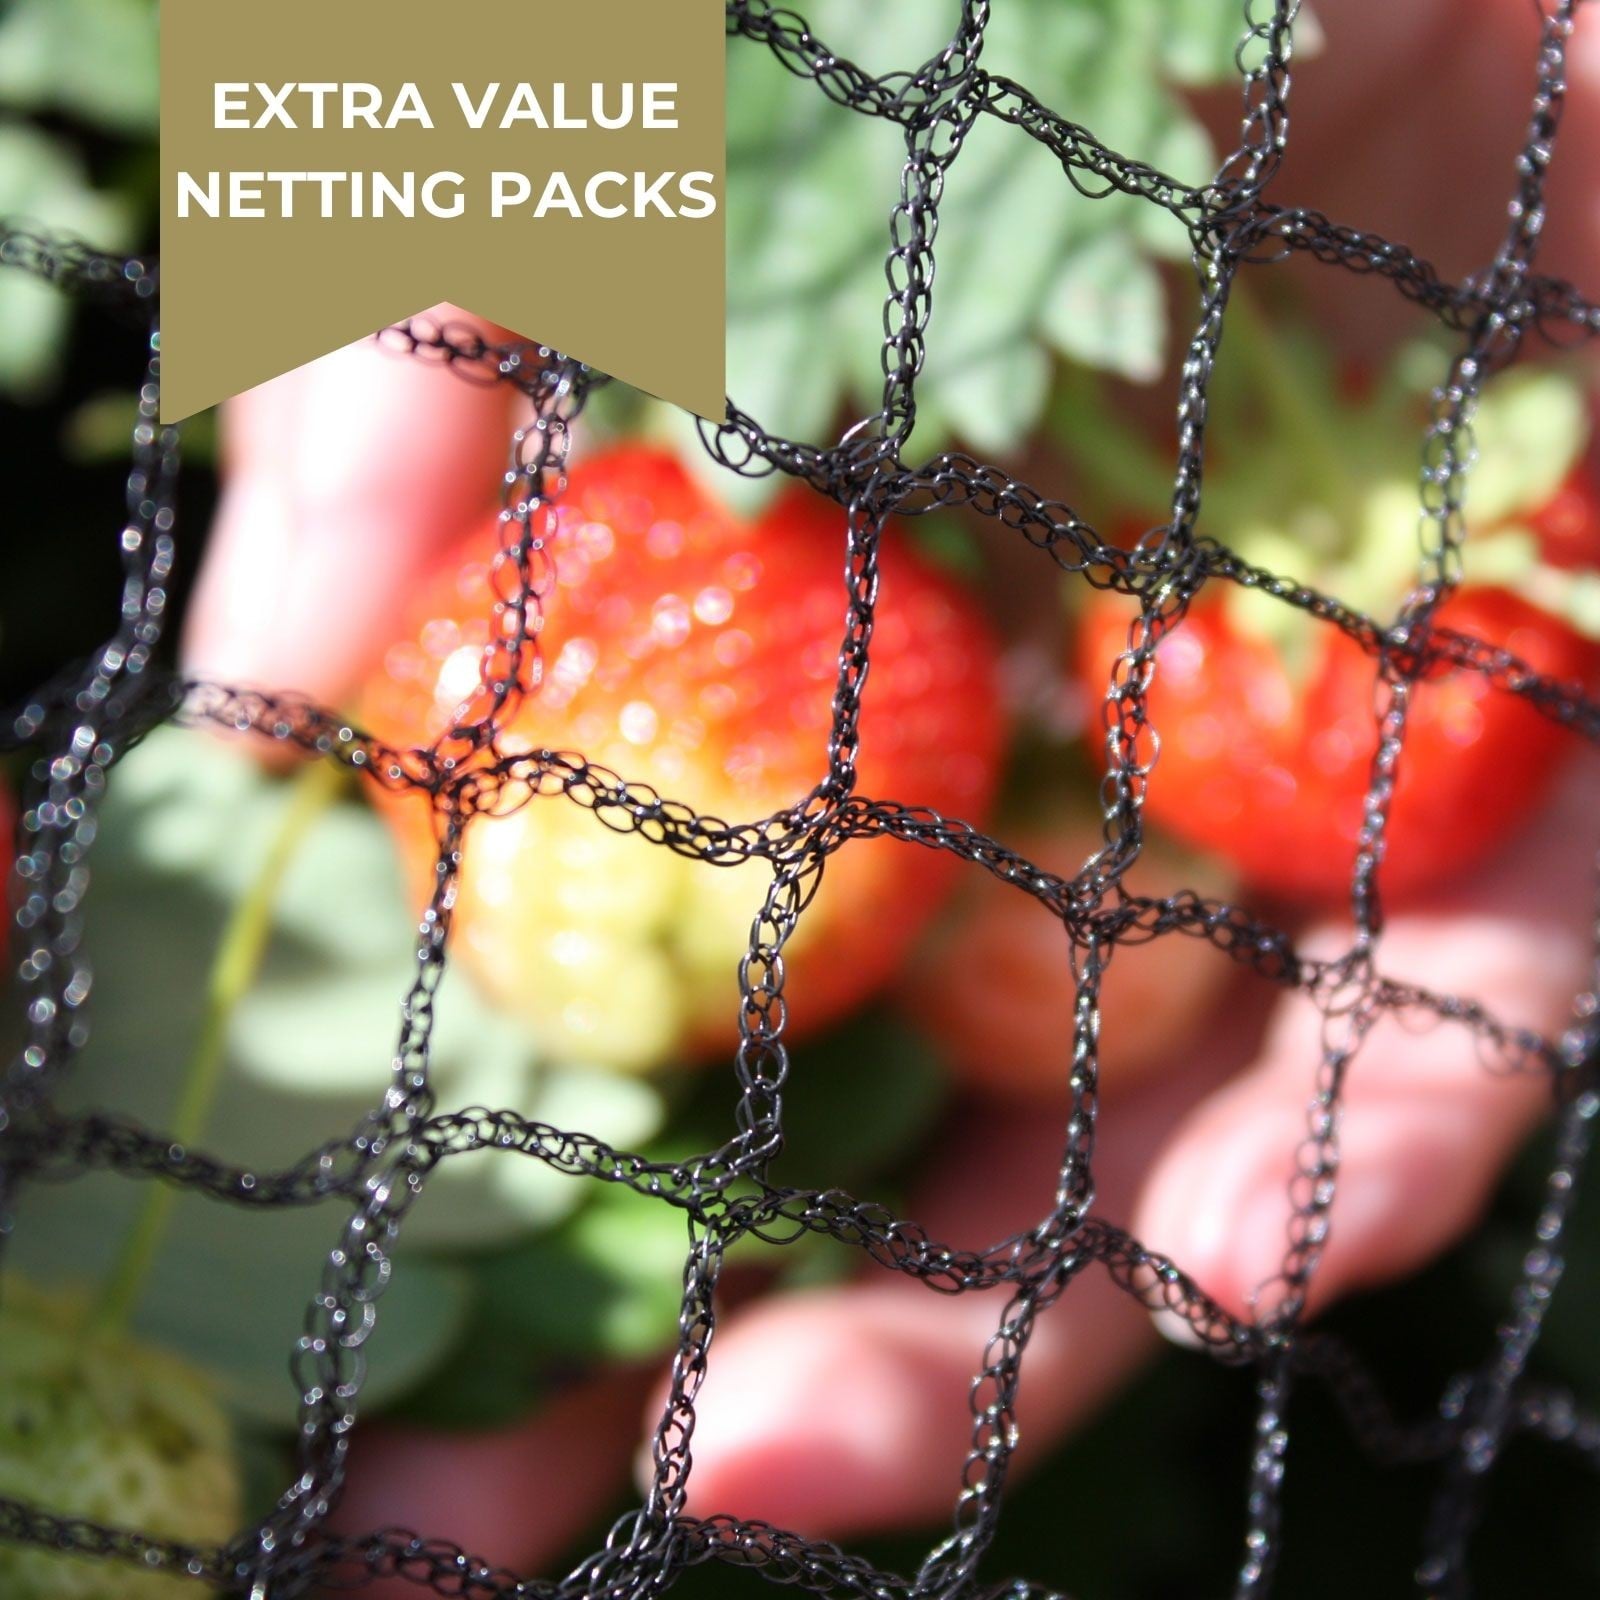 High Quality Bird Netting to Protect Your Plants - Harrod